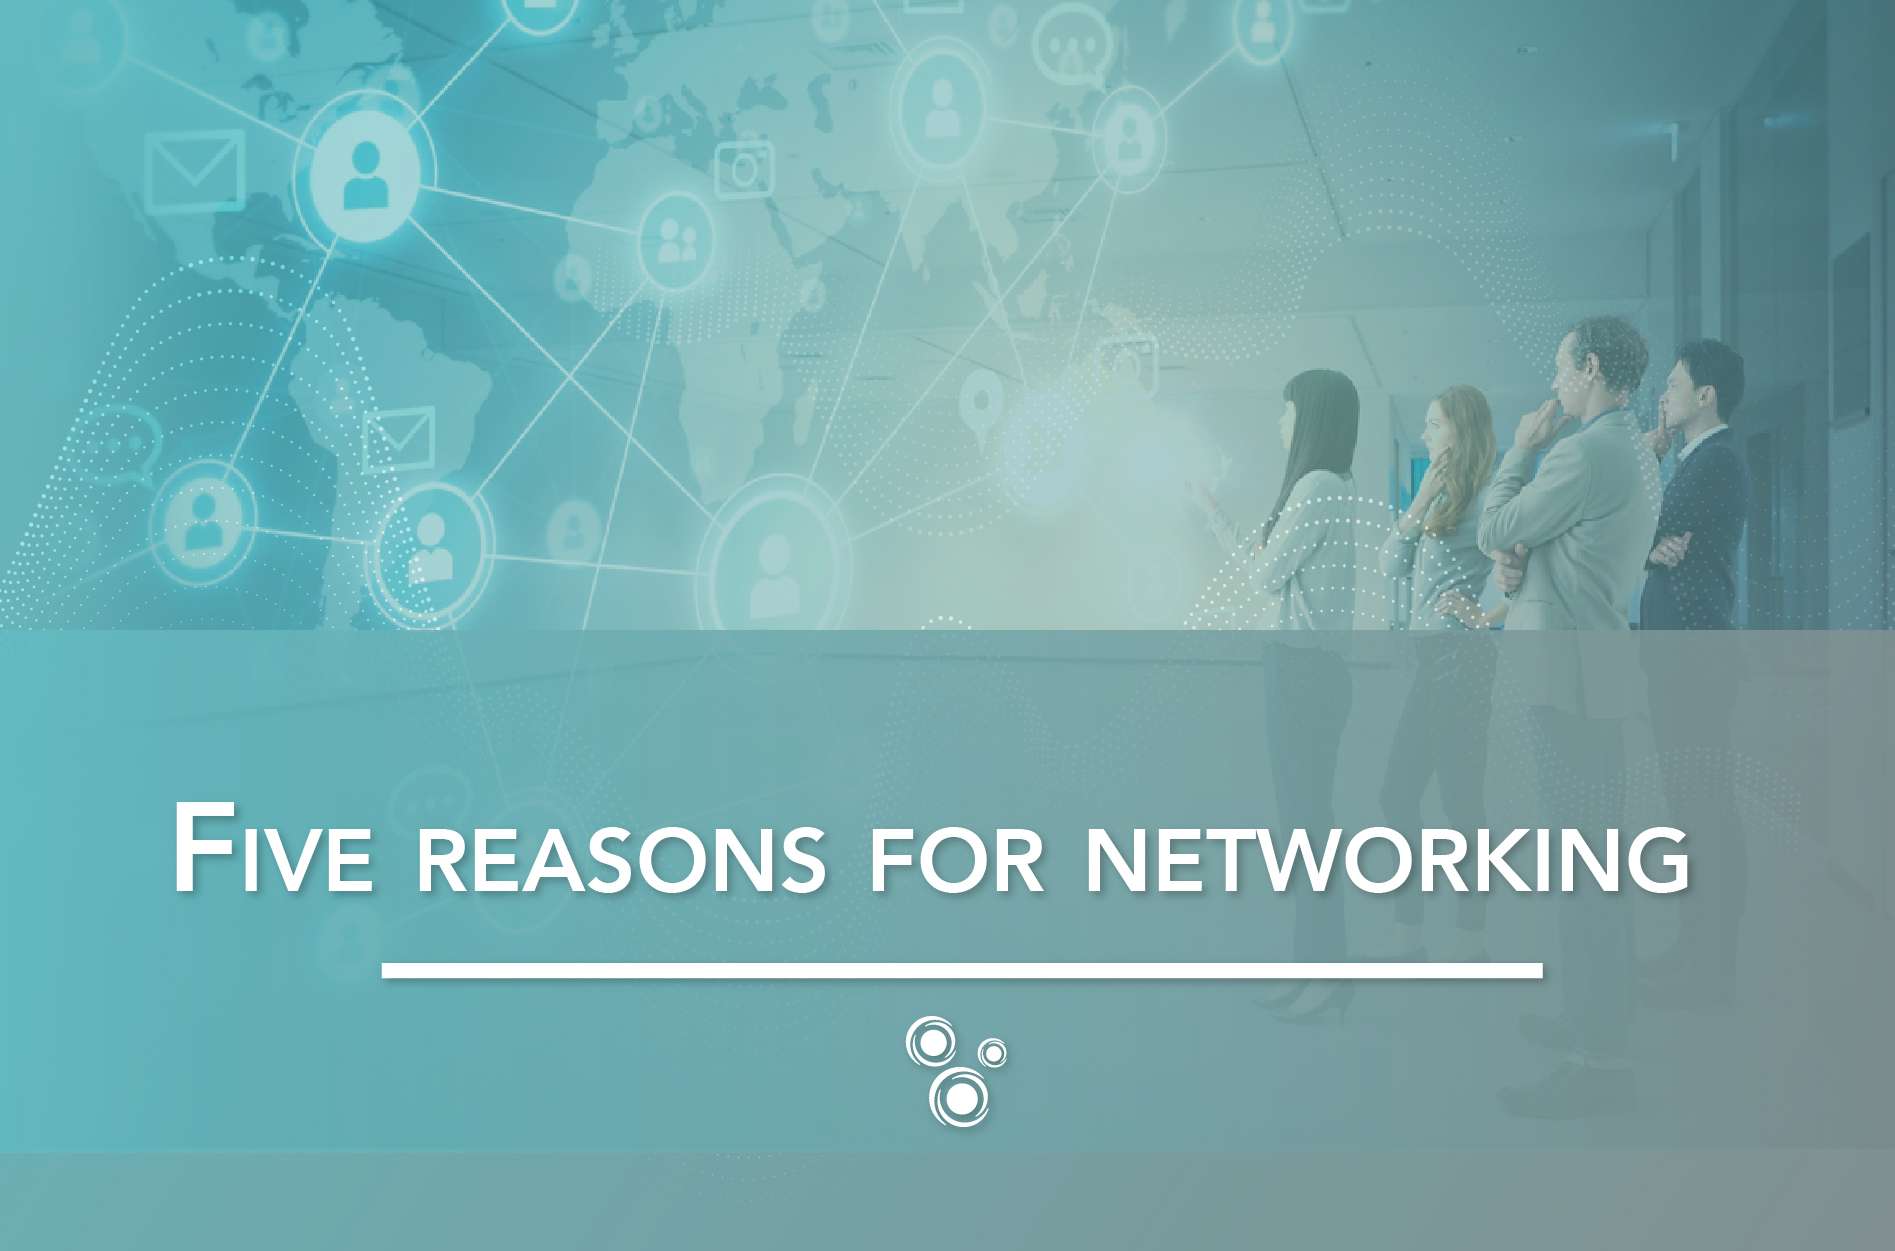 Five reasons for networking